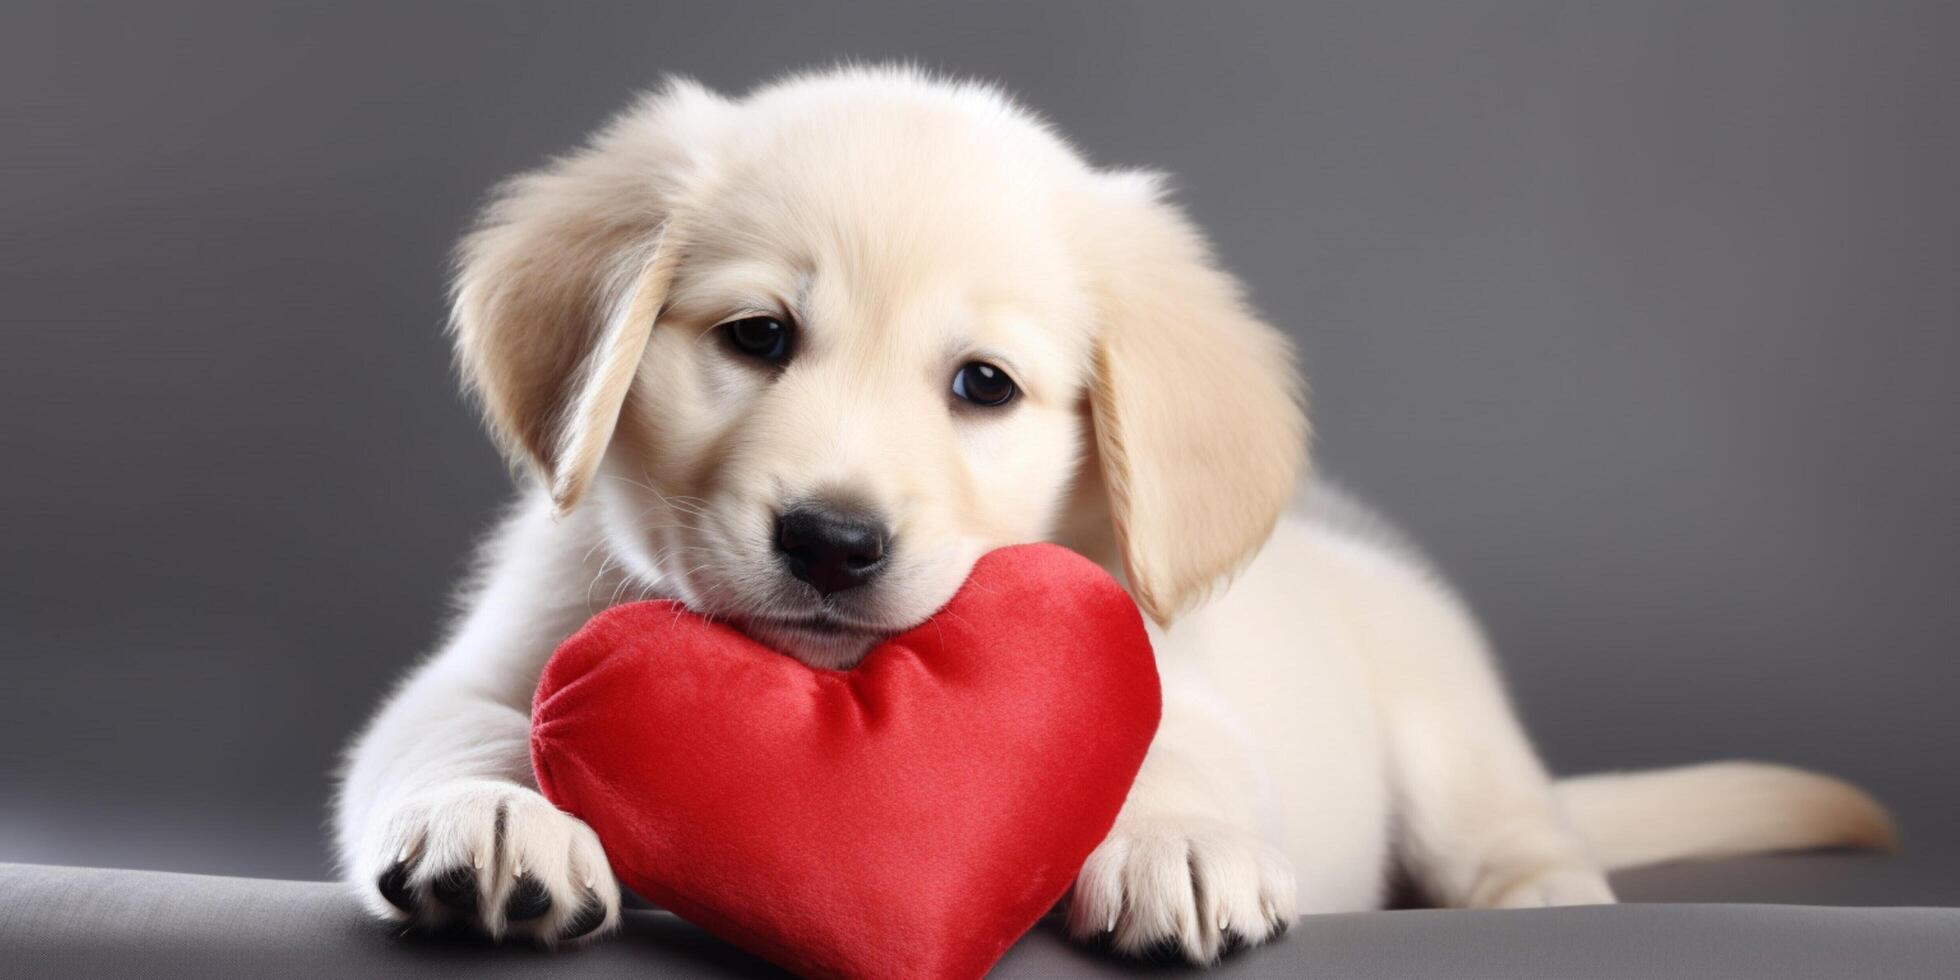 Puppy with a heart photo